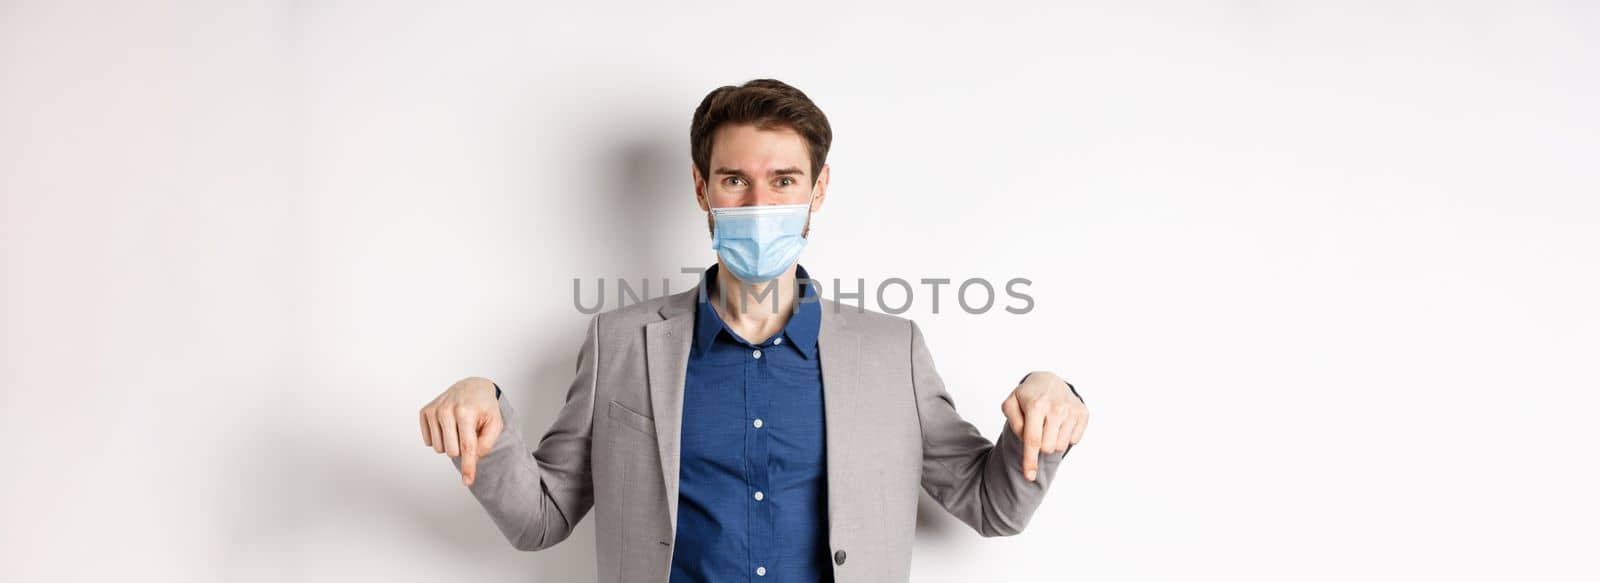 Covid-19, pandemic and business concept. Handsome businessman in medical mask and suit, pointing fingers down and showing company logo, white background.